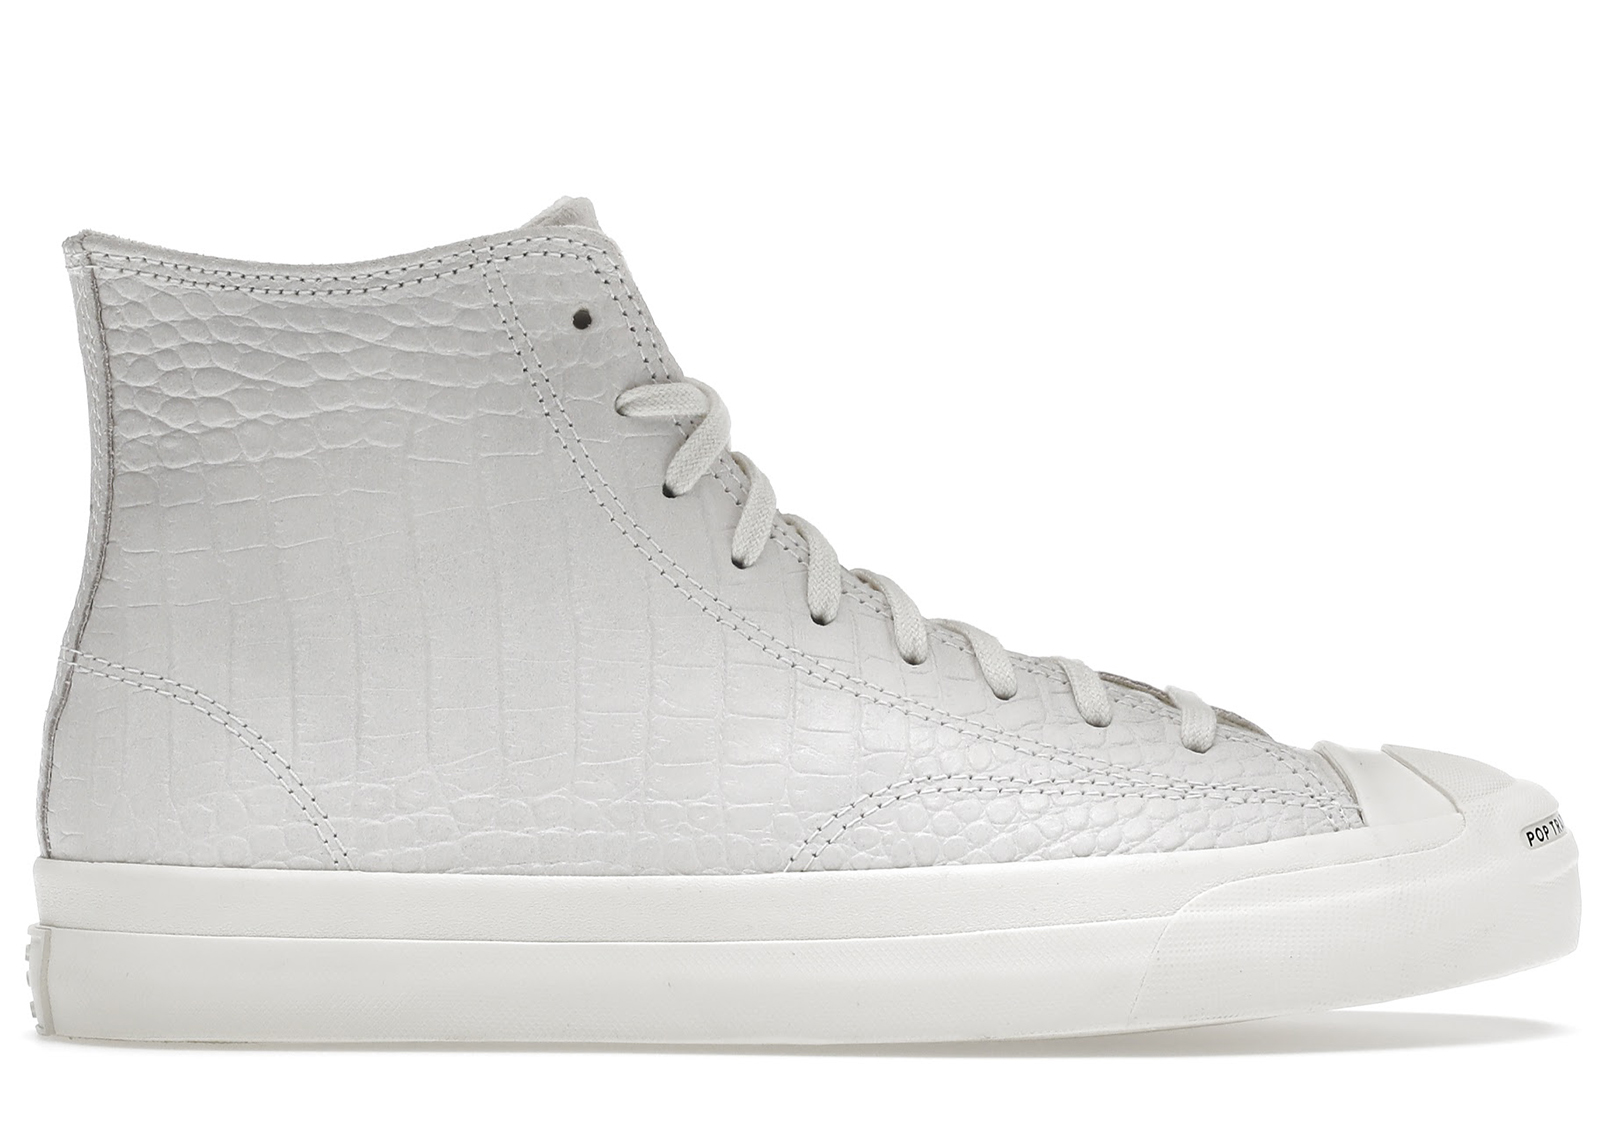 Converse Jack Purcell Pop Trading Company Dragonskin